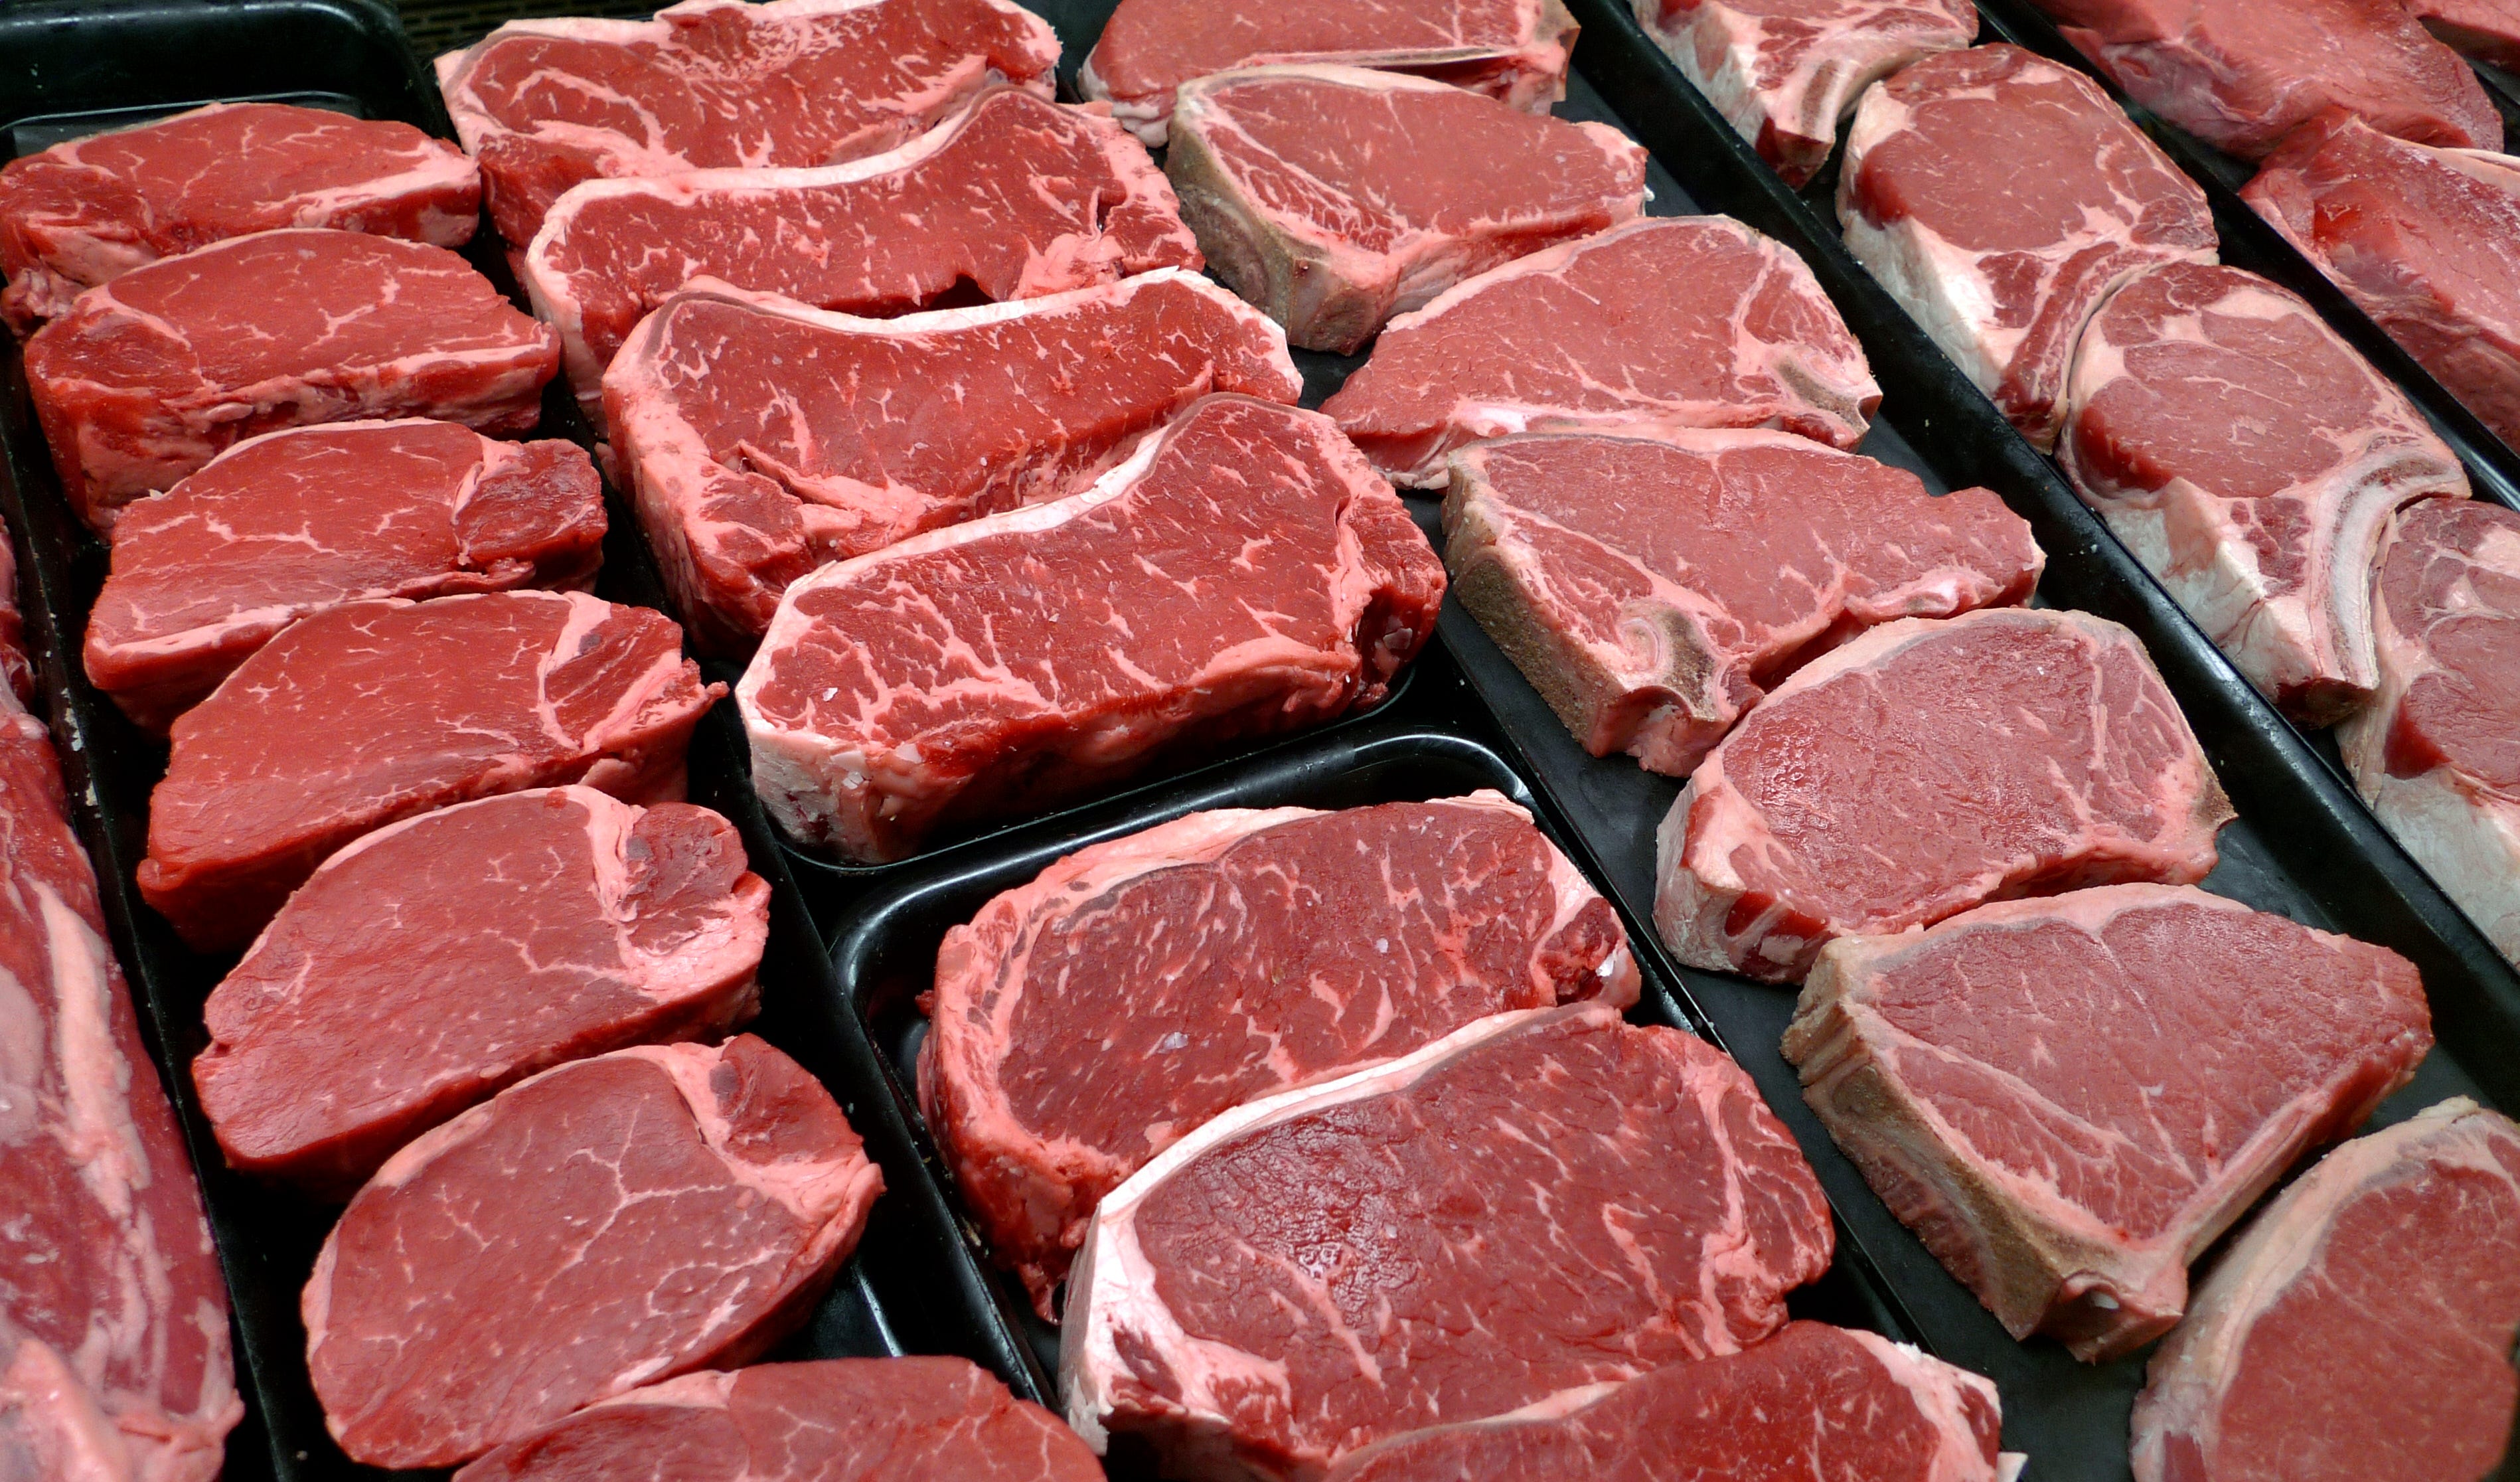 Red red flags discredited: Fake meat worse for health